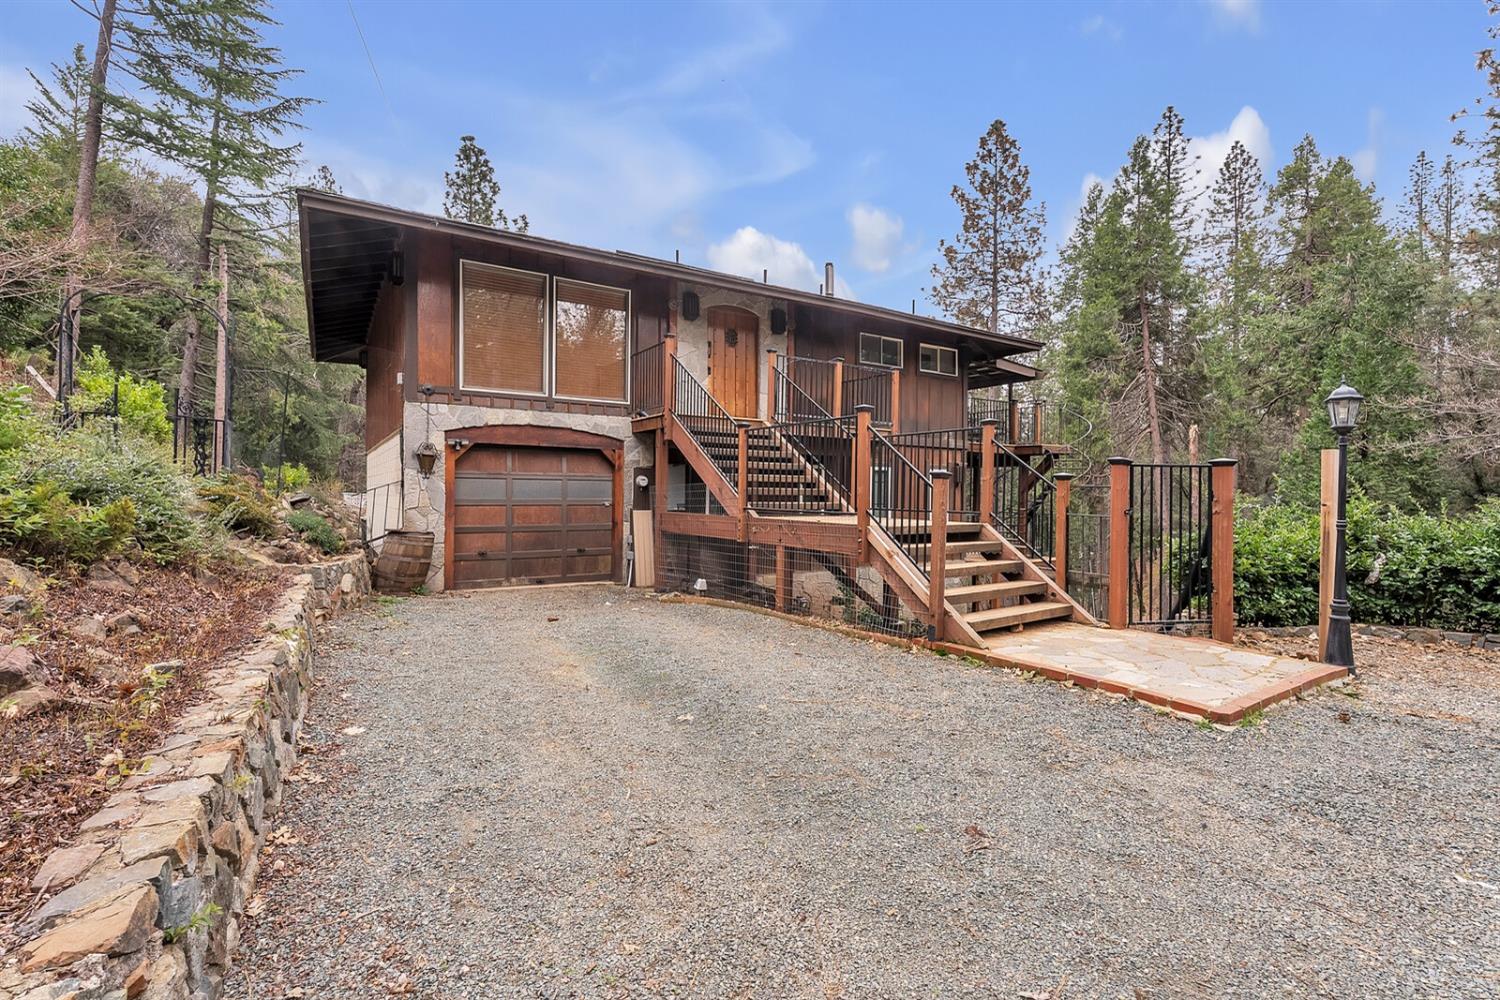 Photo of 14147 Greenhorn Rd in Grass Valley, CA